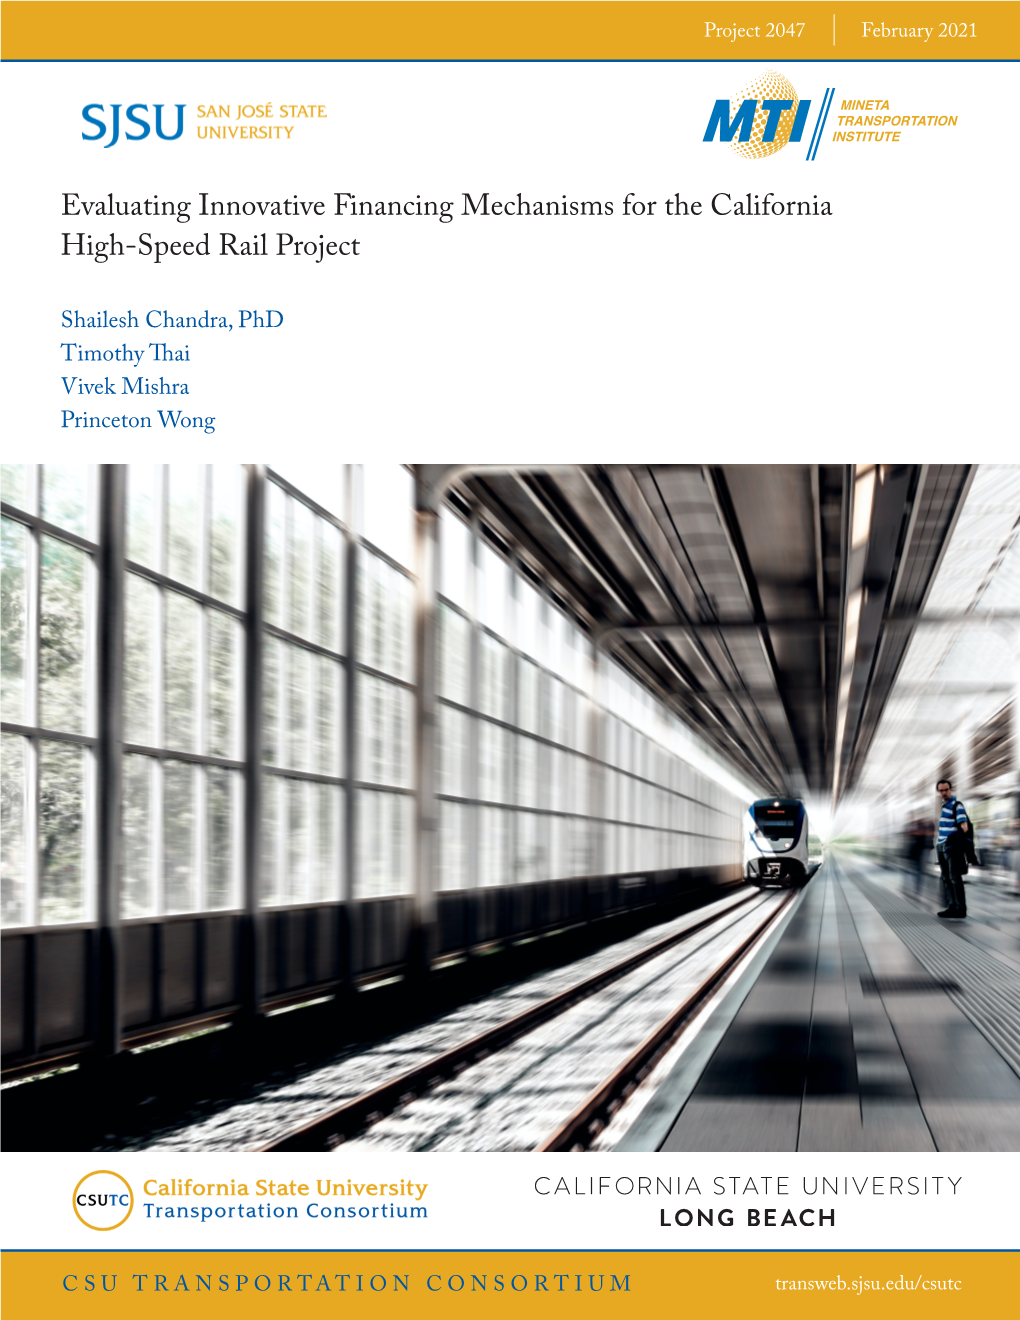 Evaluating Innovative Financing Mechanisms for the California High-Speed Rail Project